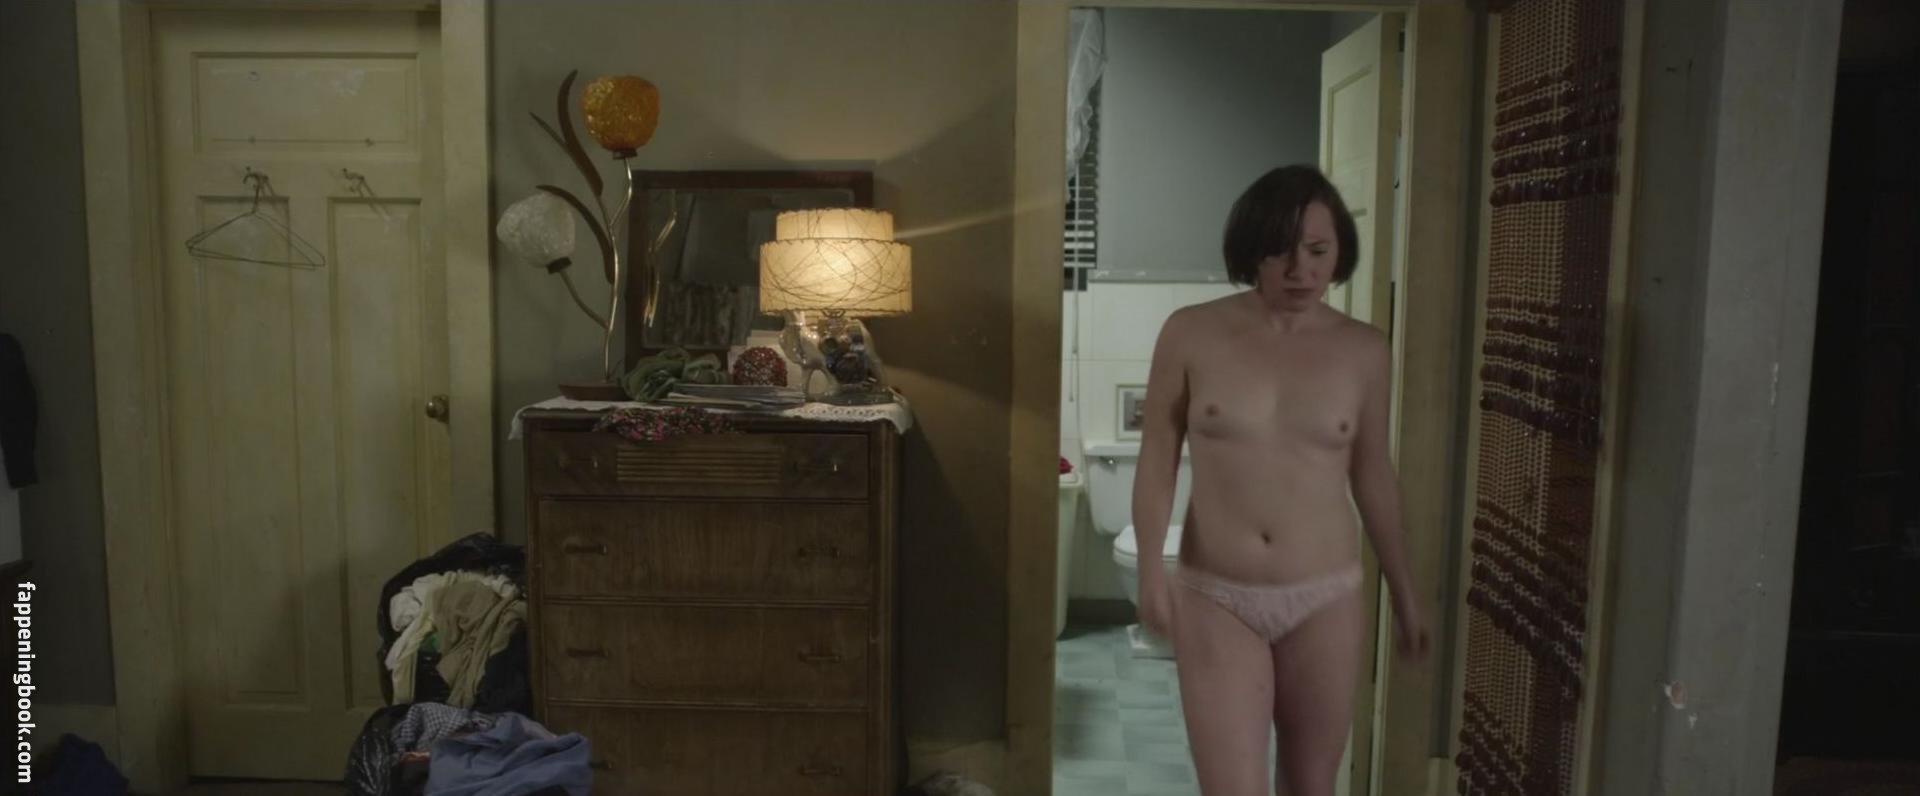 Nude Roles in Movies: Comforting Skin (2011), Good Luck Chuck (2007) .